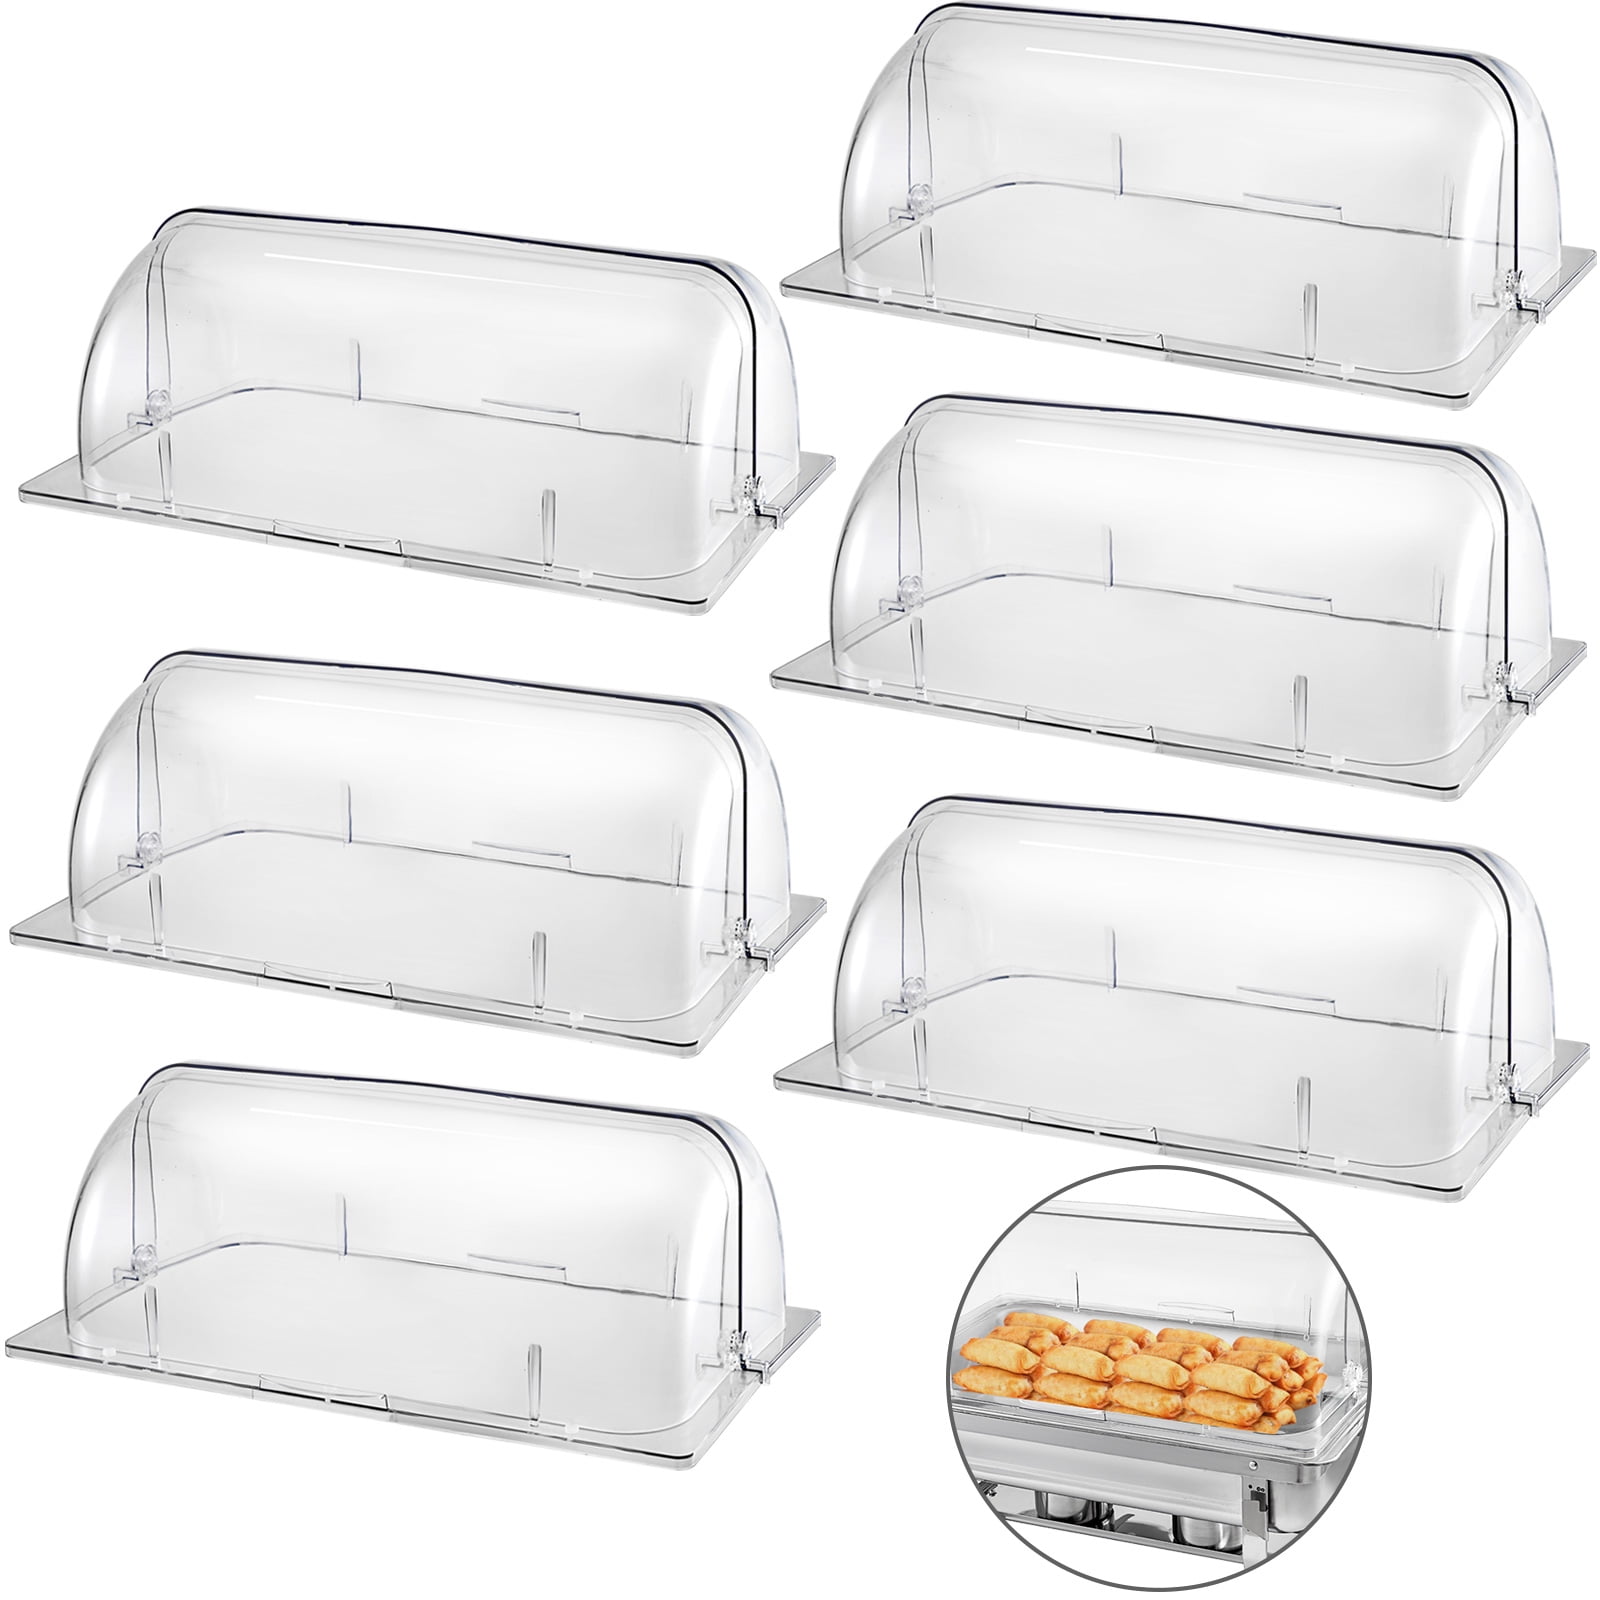 4 Pack Full Size Roll Top Chafing Dish Clear Plastic Pan Display Cover Chafer 